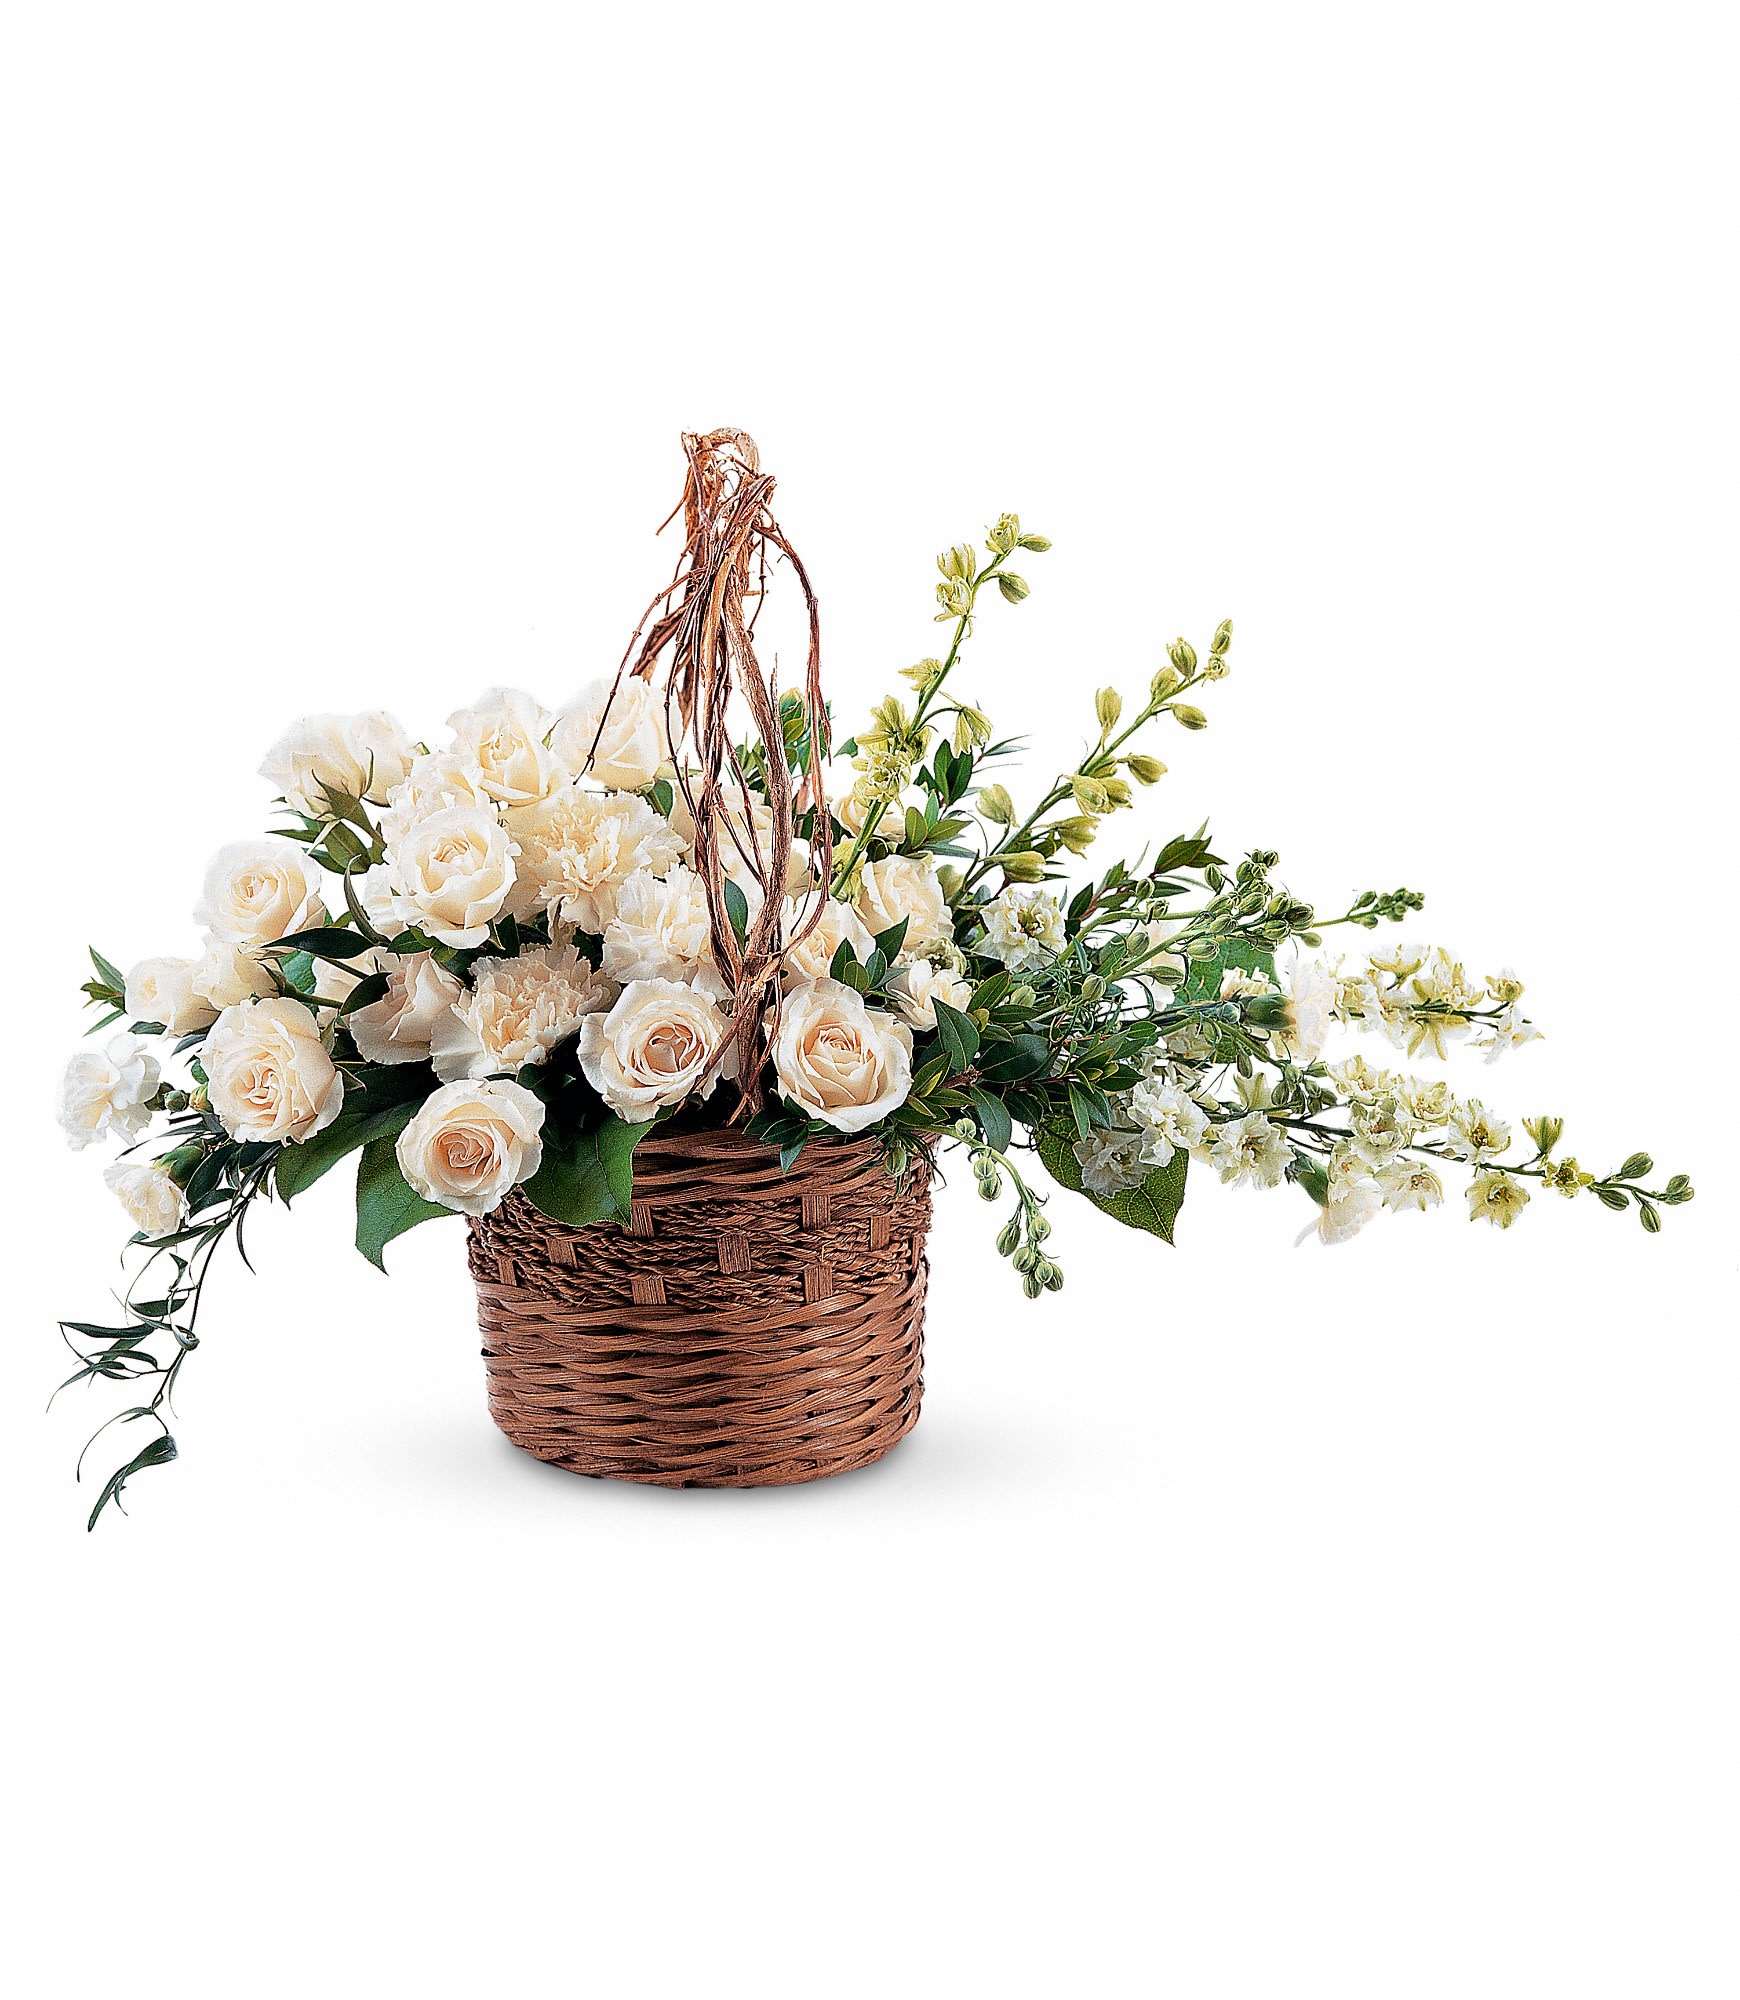 Basket of Light by Teleflora - This delicate wicker basket filled with beautiful white flowers will surely spread some light to those you're thinking of. Perfect for the service or the home. 